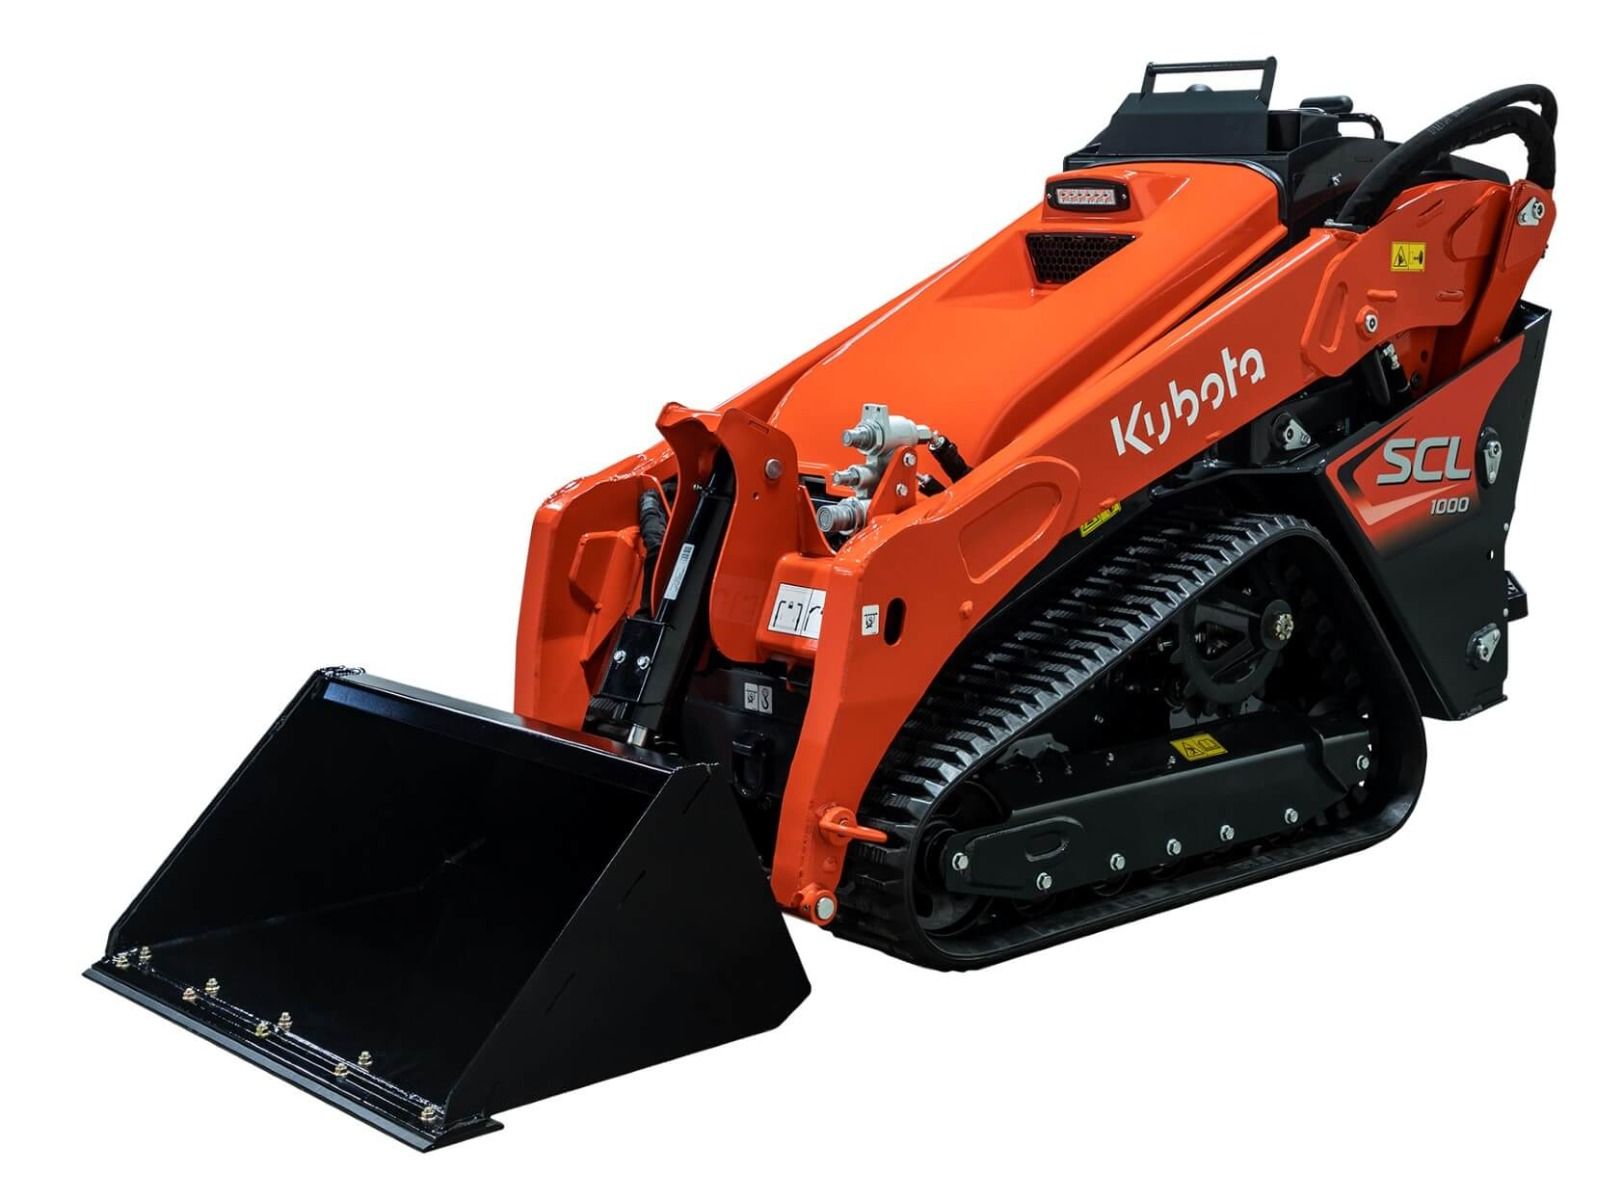 Featured image for “Kubota SCL 1000 | Stand-On”